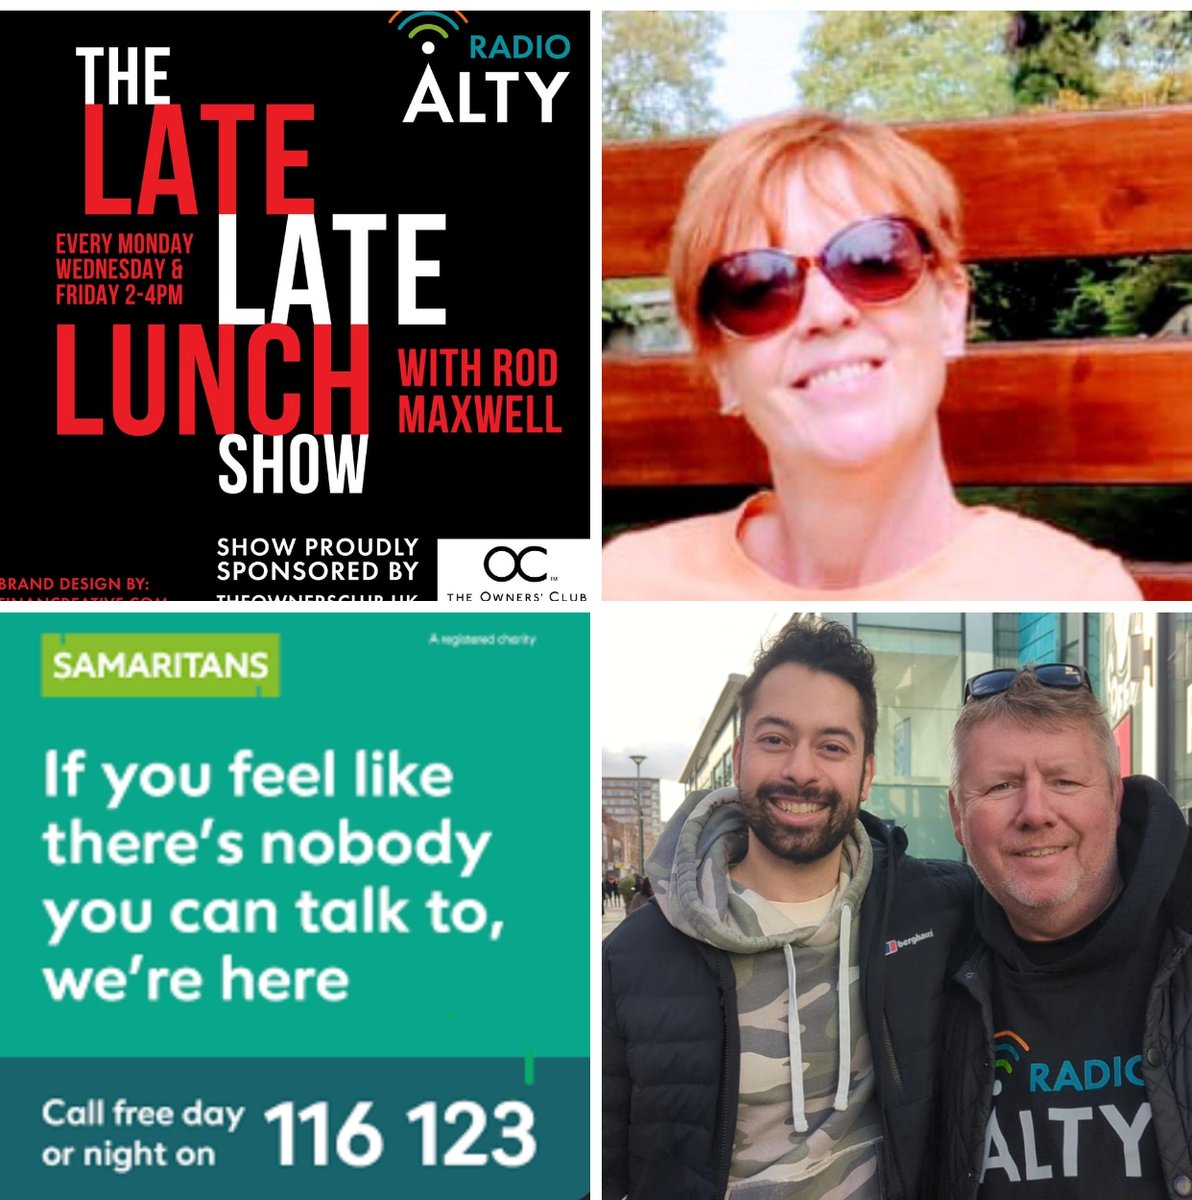 On #theLateLateLunchshow today from 2pm, Rod is joined by Lynn Sbaih - Branch Director & Listening Volunteer at #Samaritans in Stockport talking about how the charity is supporting communities post the pandemic & during the tough economic times. #samaritans #listening